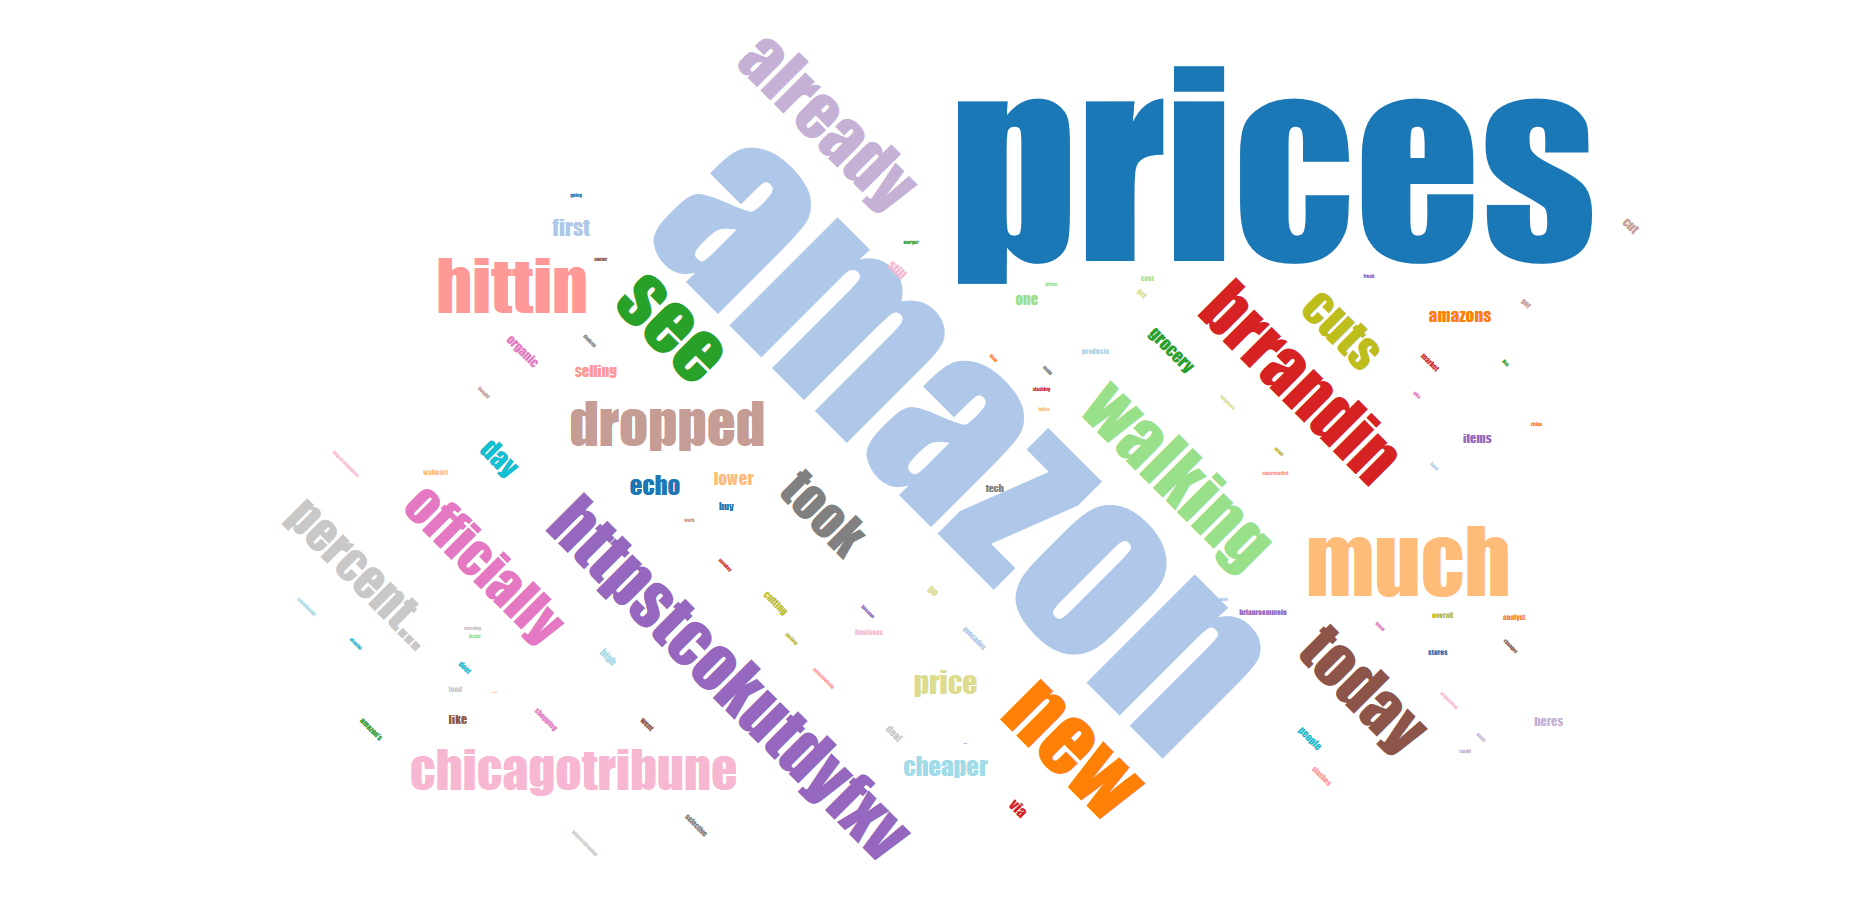 Word cloud with "amazon" and "prices" featured the largest followed by "much", "new", and "today"